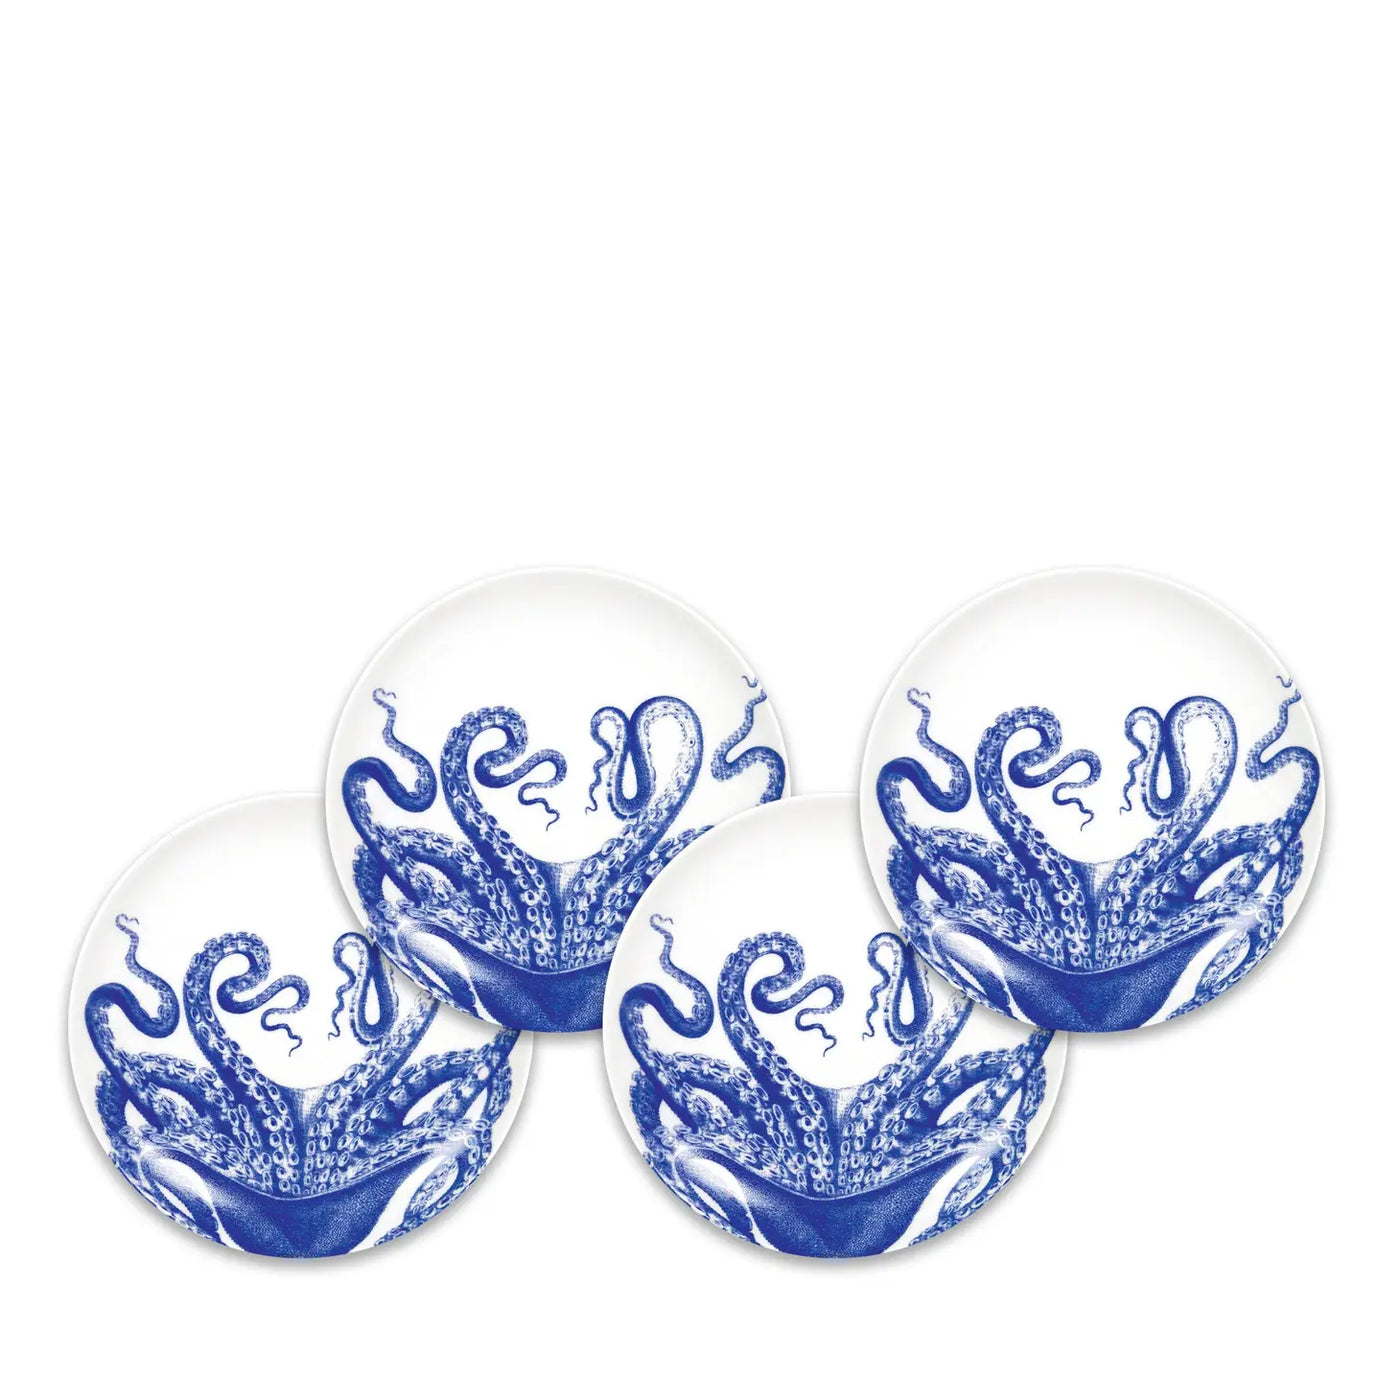 Lucy Canapé Plates- Set of 4 Boxed